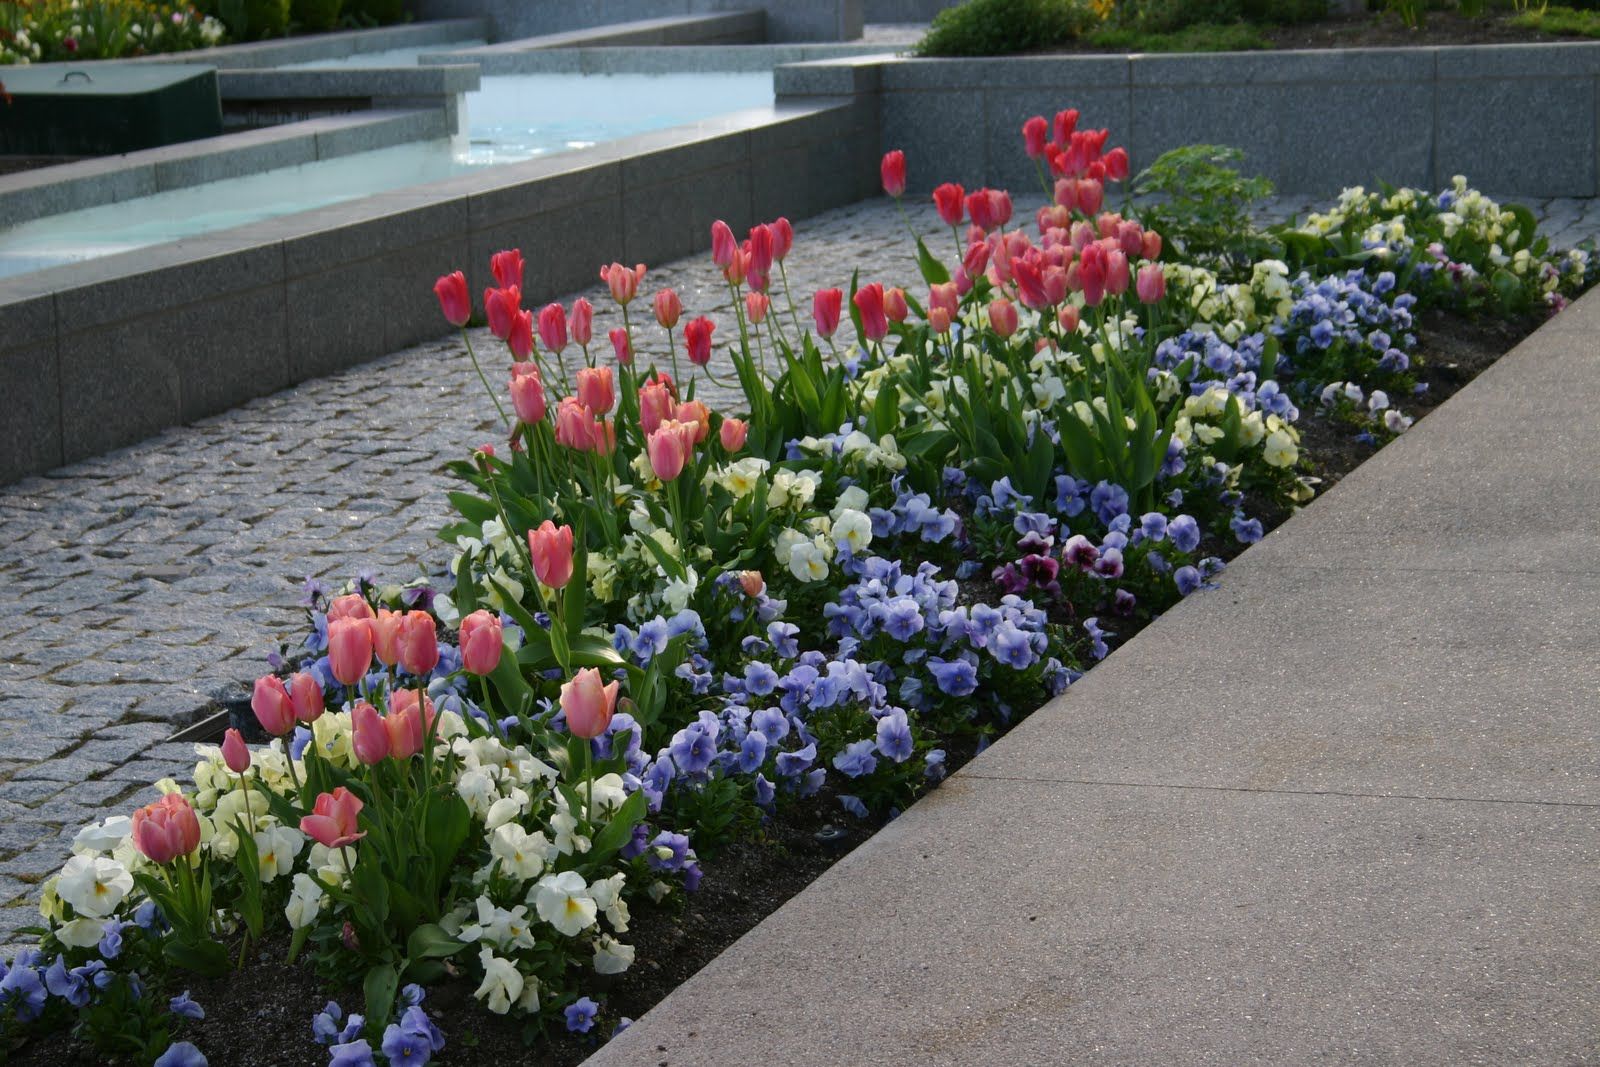 15 fascinating flower garden designs and how to start one